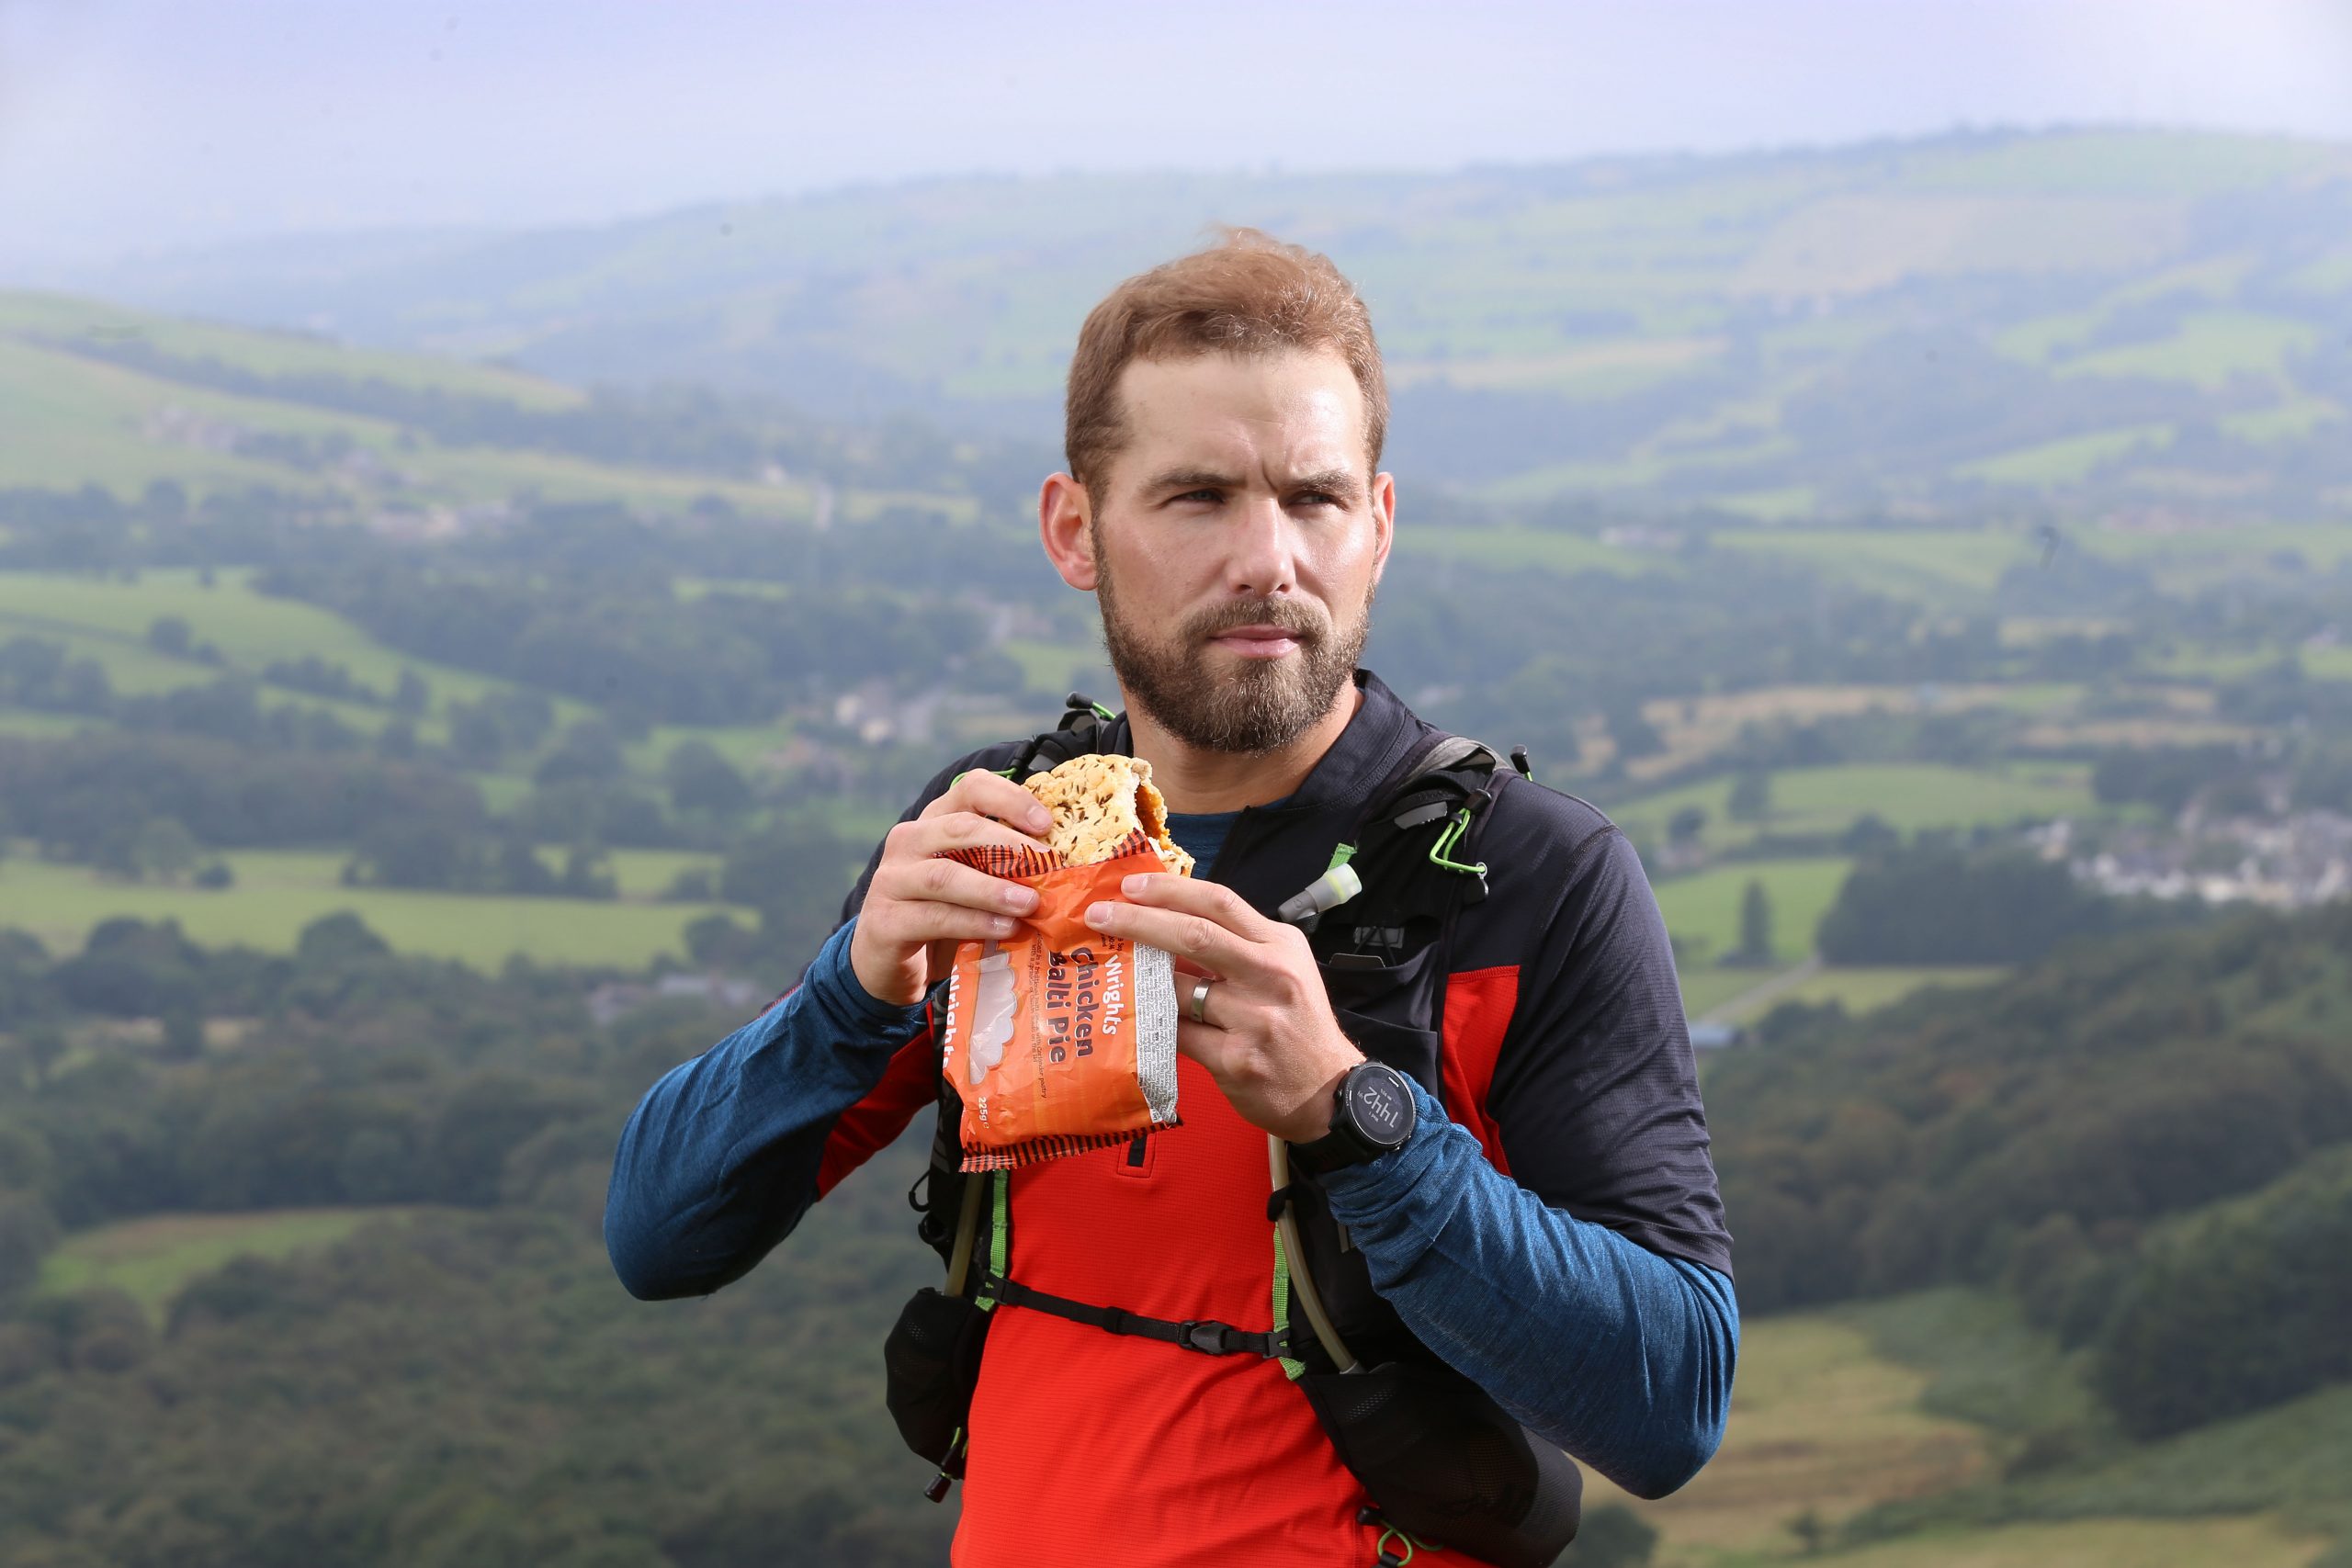 The pies are Wrights for ultra-trail Snowdonia runner